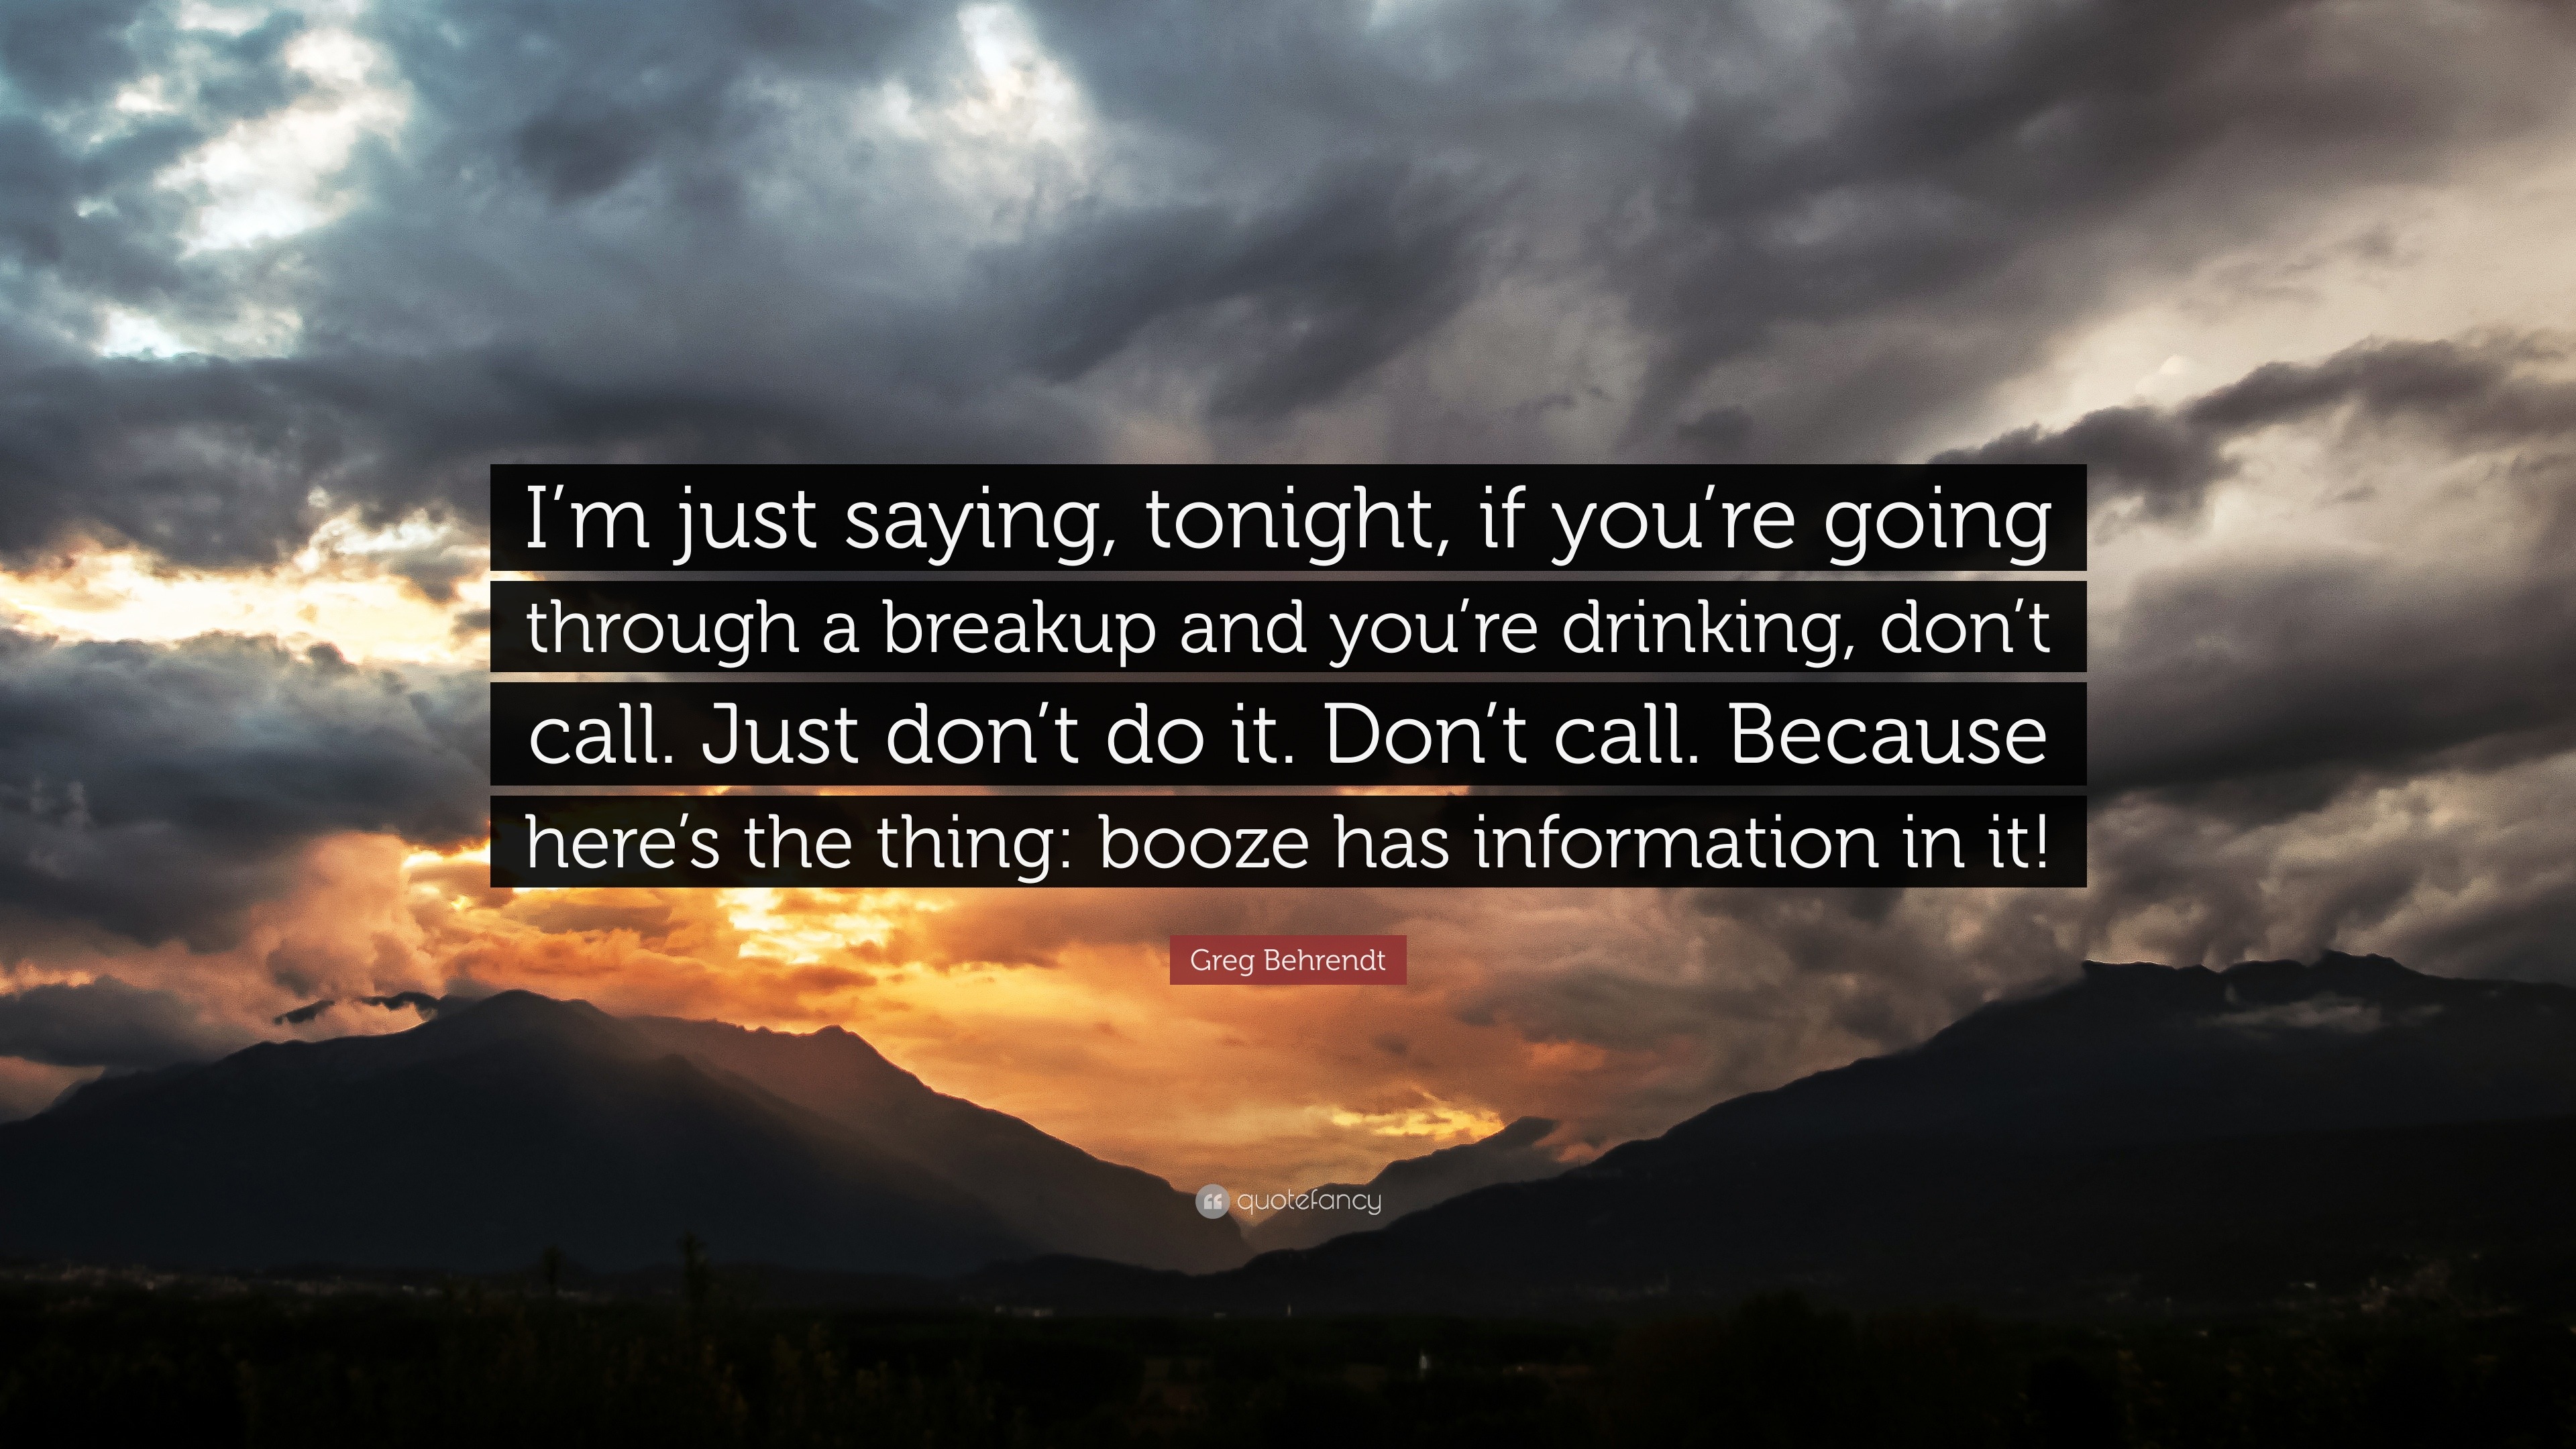 Greg Behrendt Quote: “I'm just saying, tonight, if you're going through a  breakup and you're drinking, don't call. Just don't do it. Don't cal”